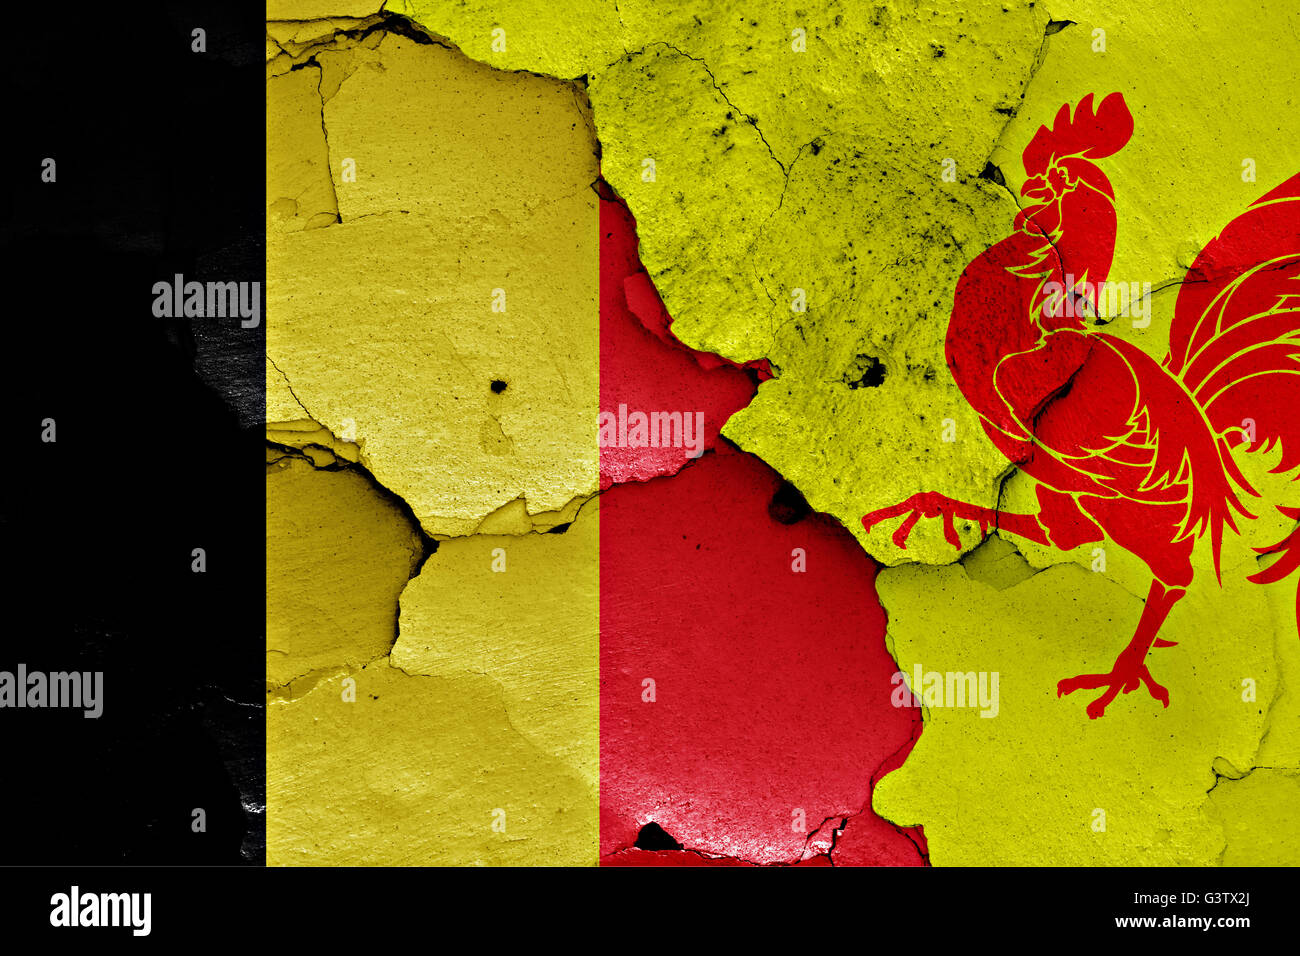 flags of Belgium and Wallonia painted on cracked wall Stock Photo